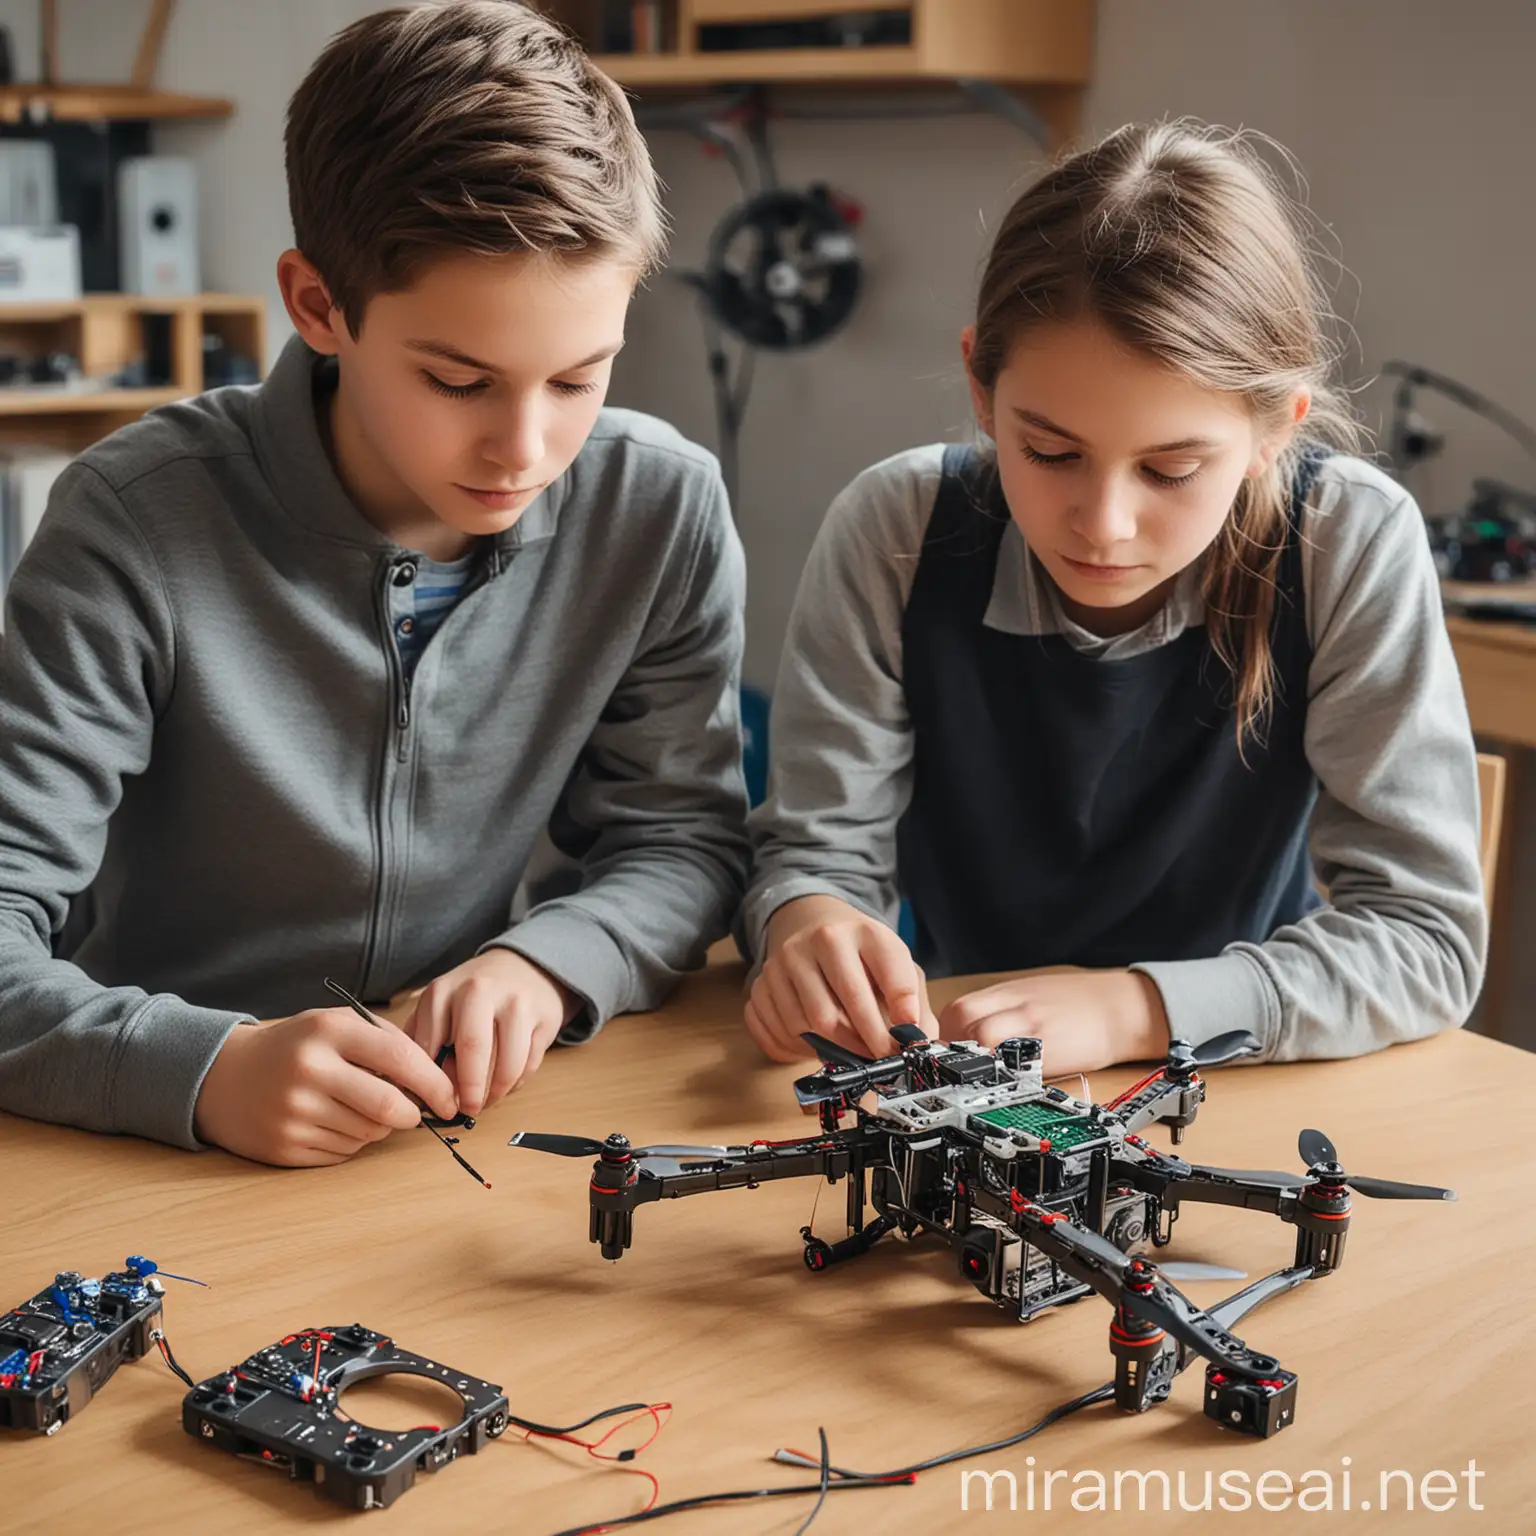 Create a picture of group of 2 children aged 16-17 that are working in a laboratory of racing FPV quadcopter creation course  . They are try to assembly the FPV drone from unassembled parts. They are looking on the drone and very dedicated in their work.